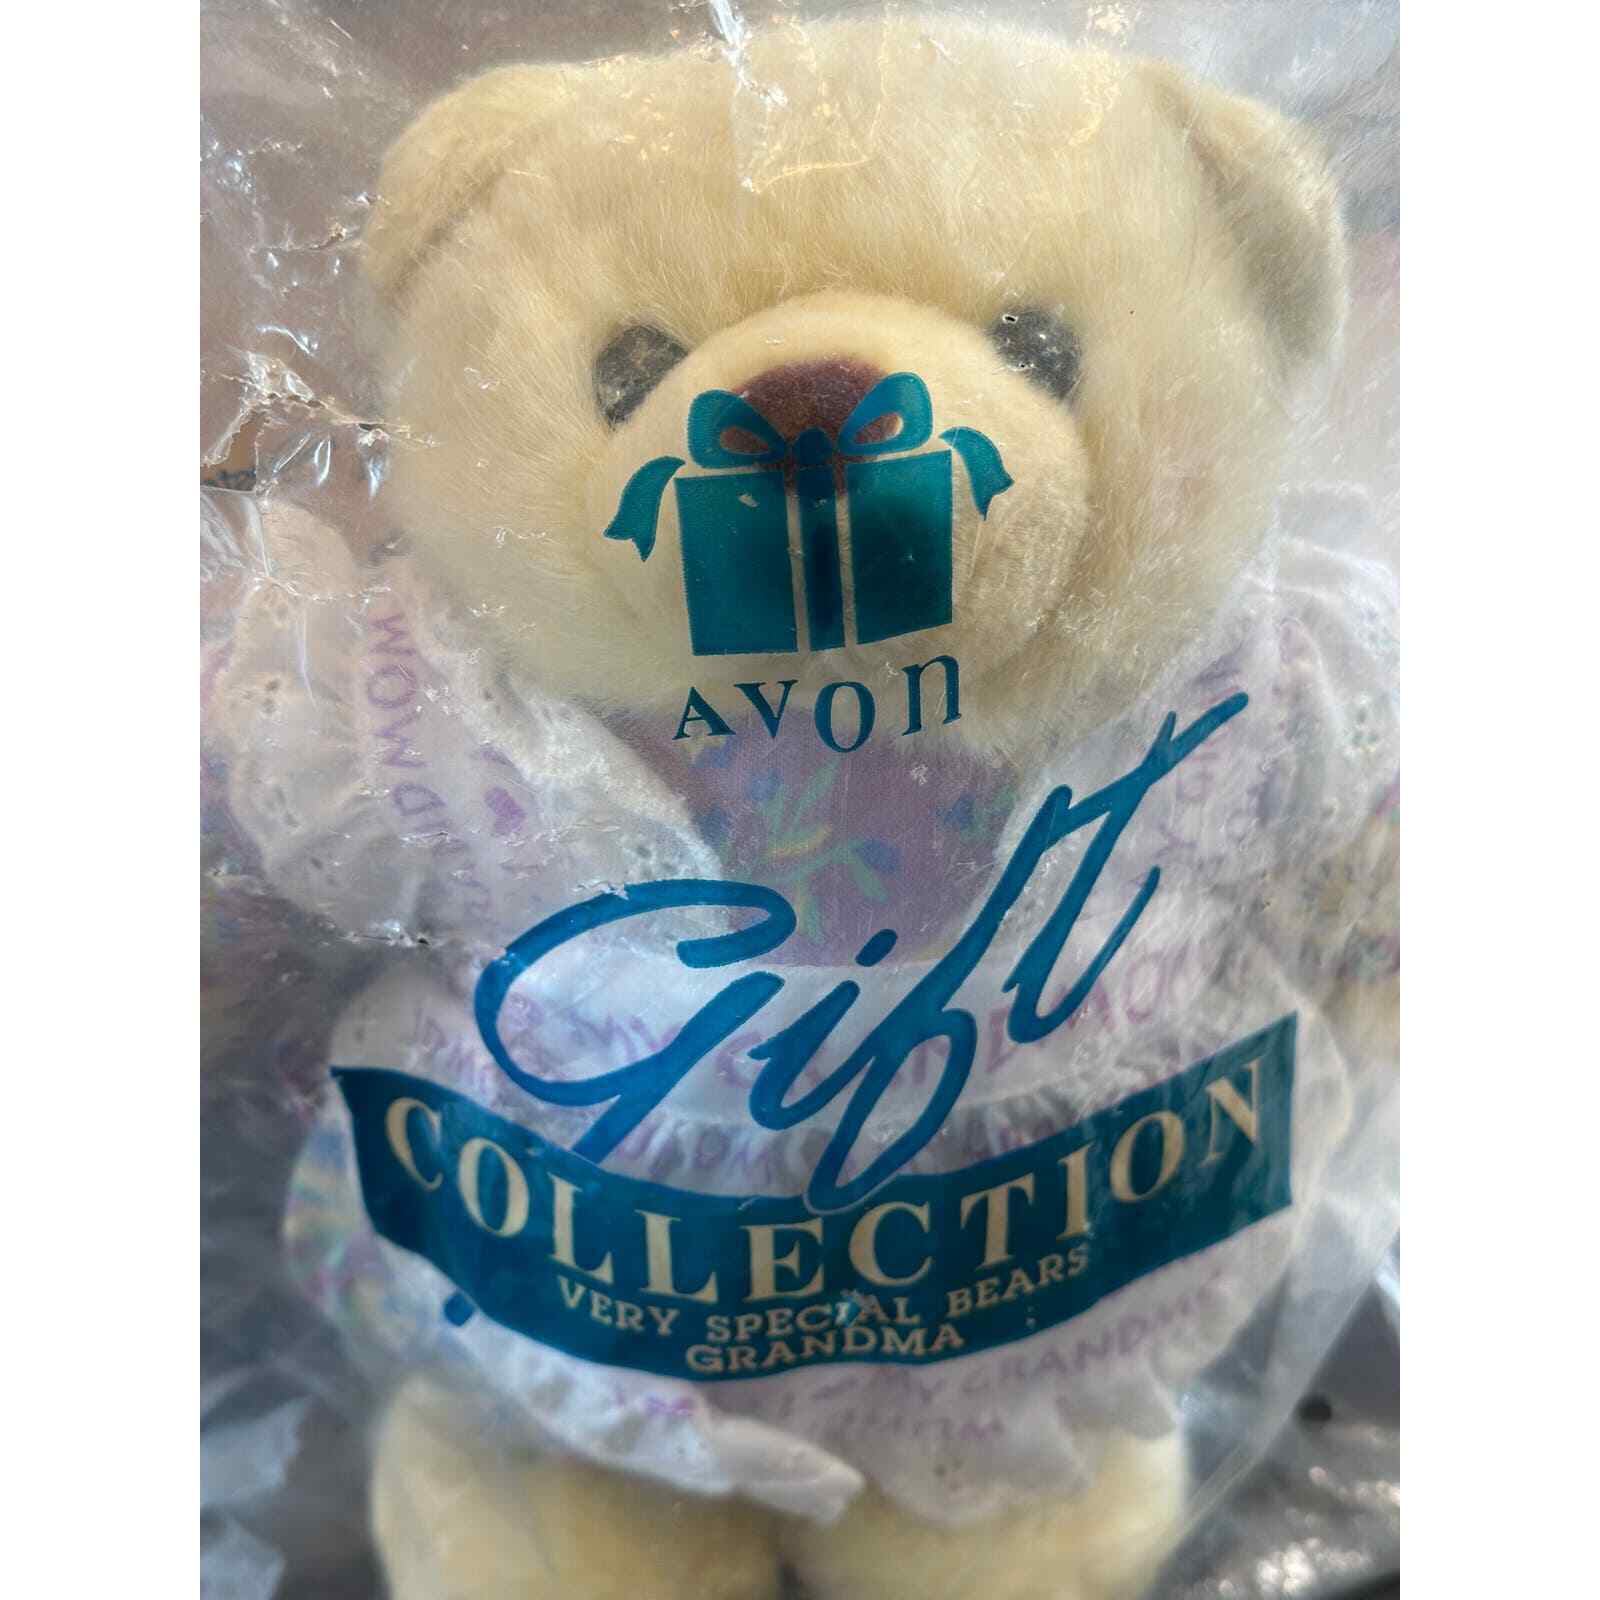 1996 Avon Gift Collection Very Special Bears 